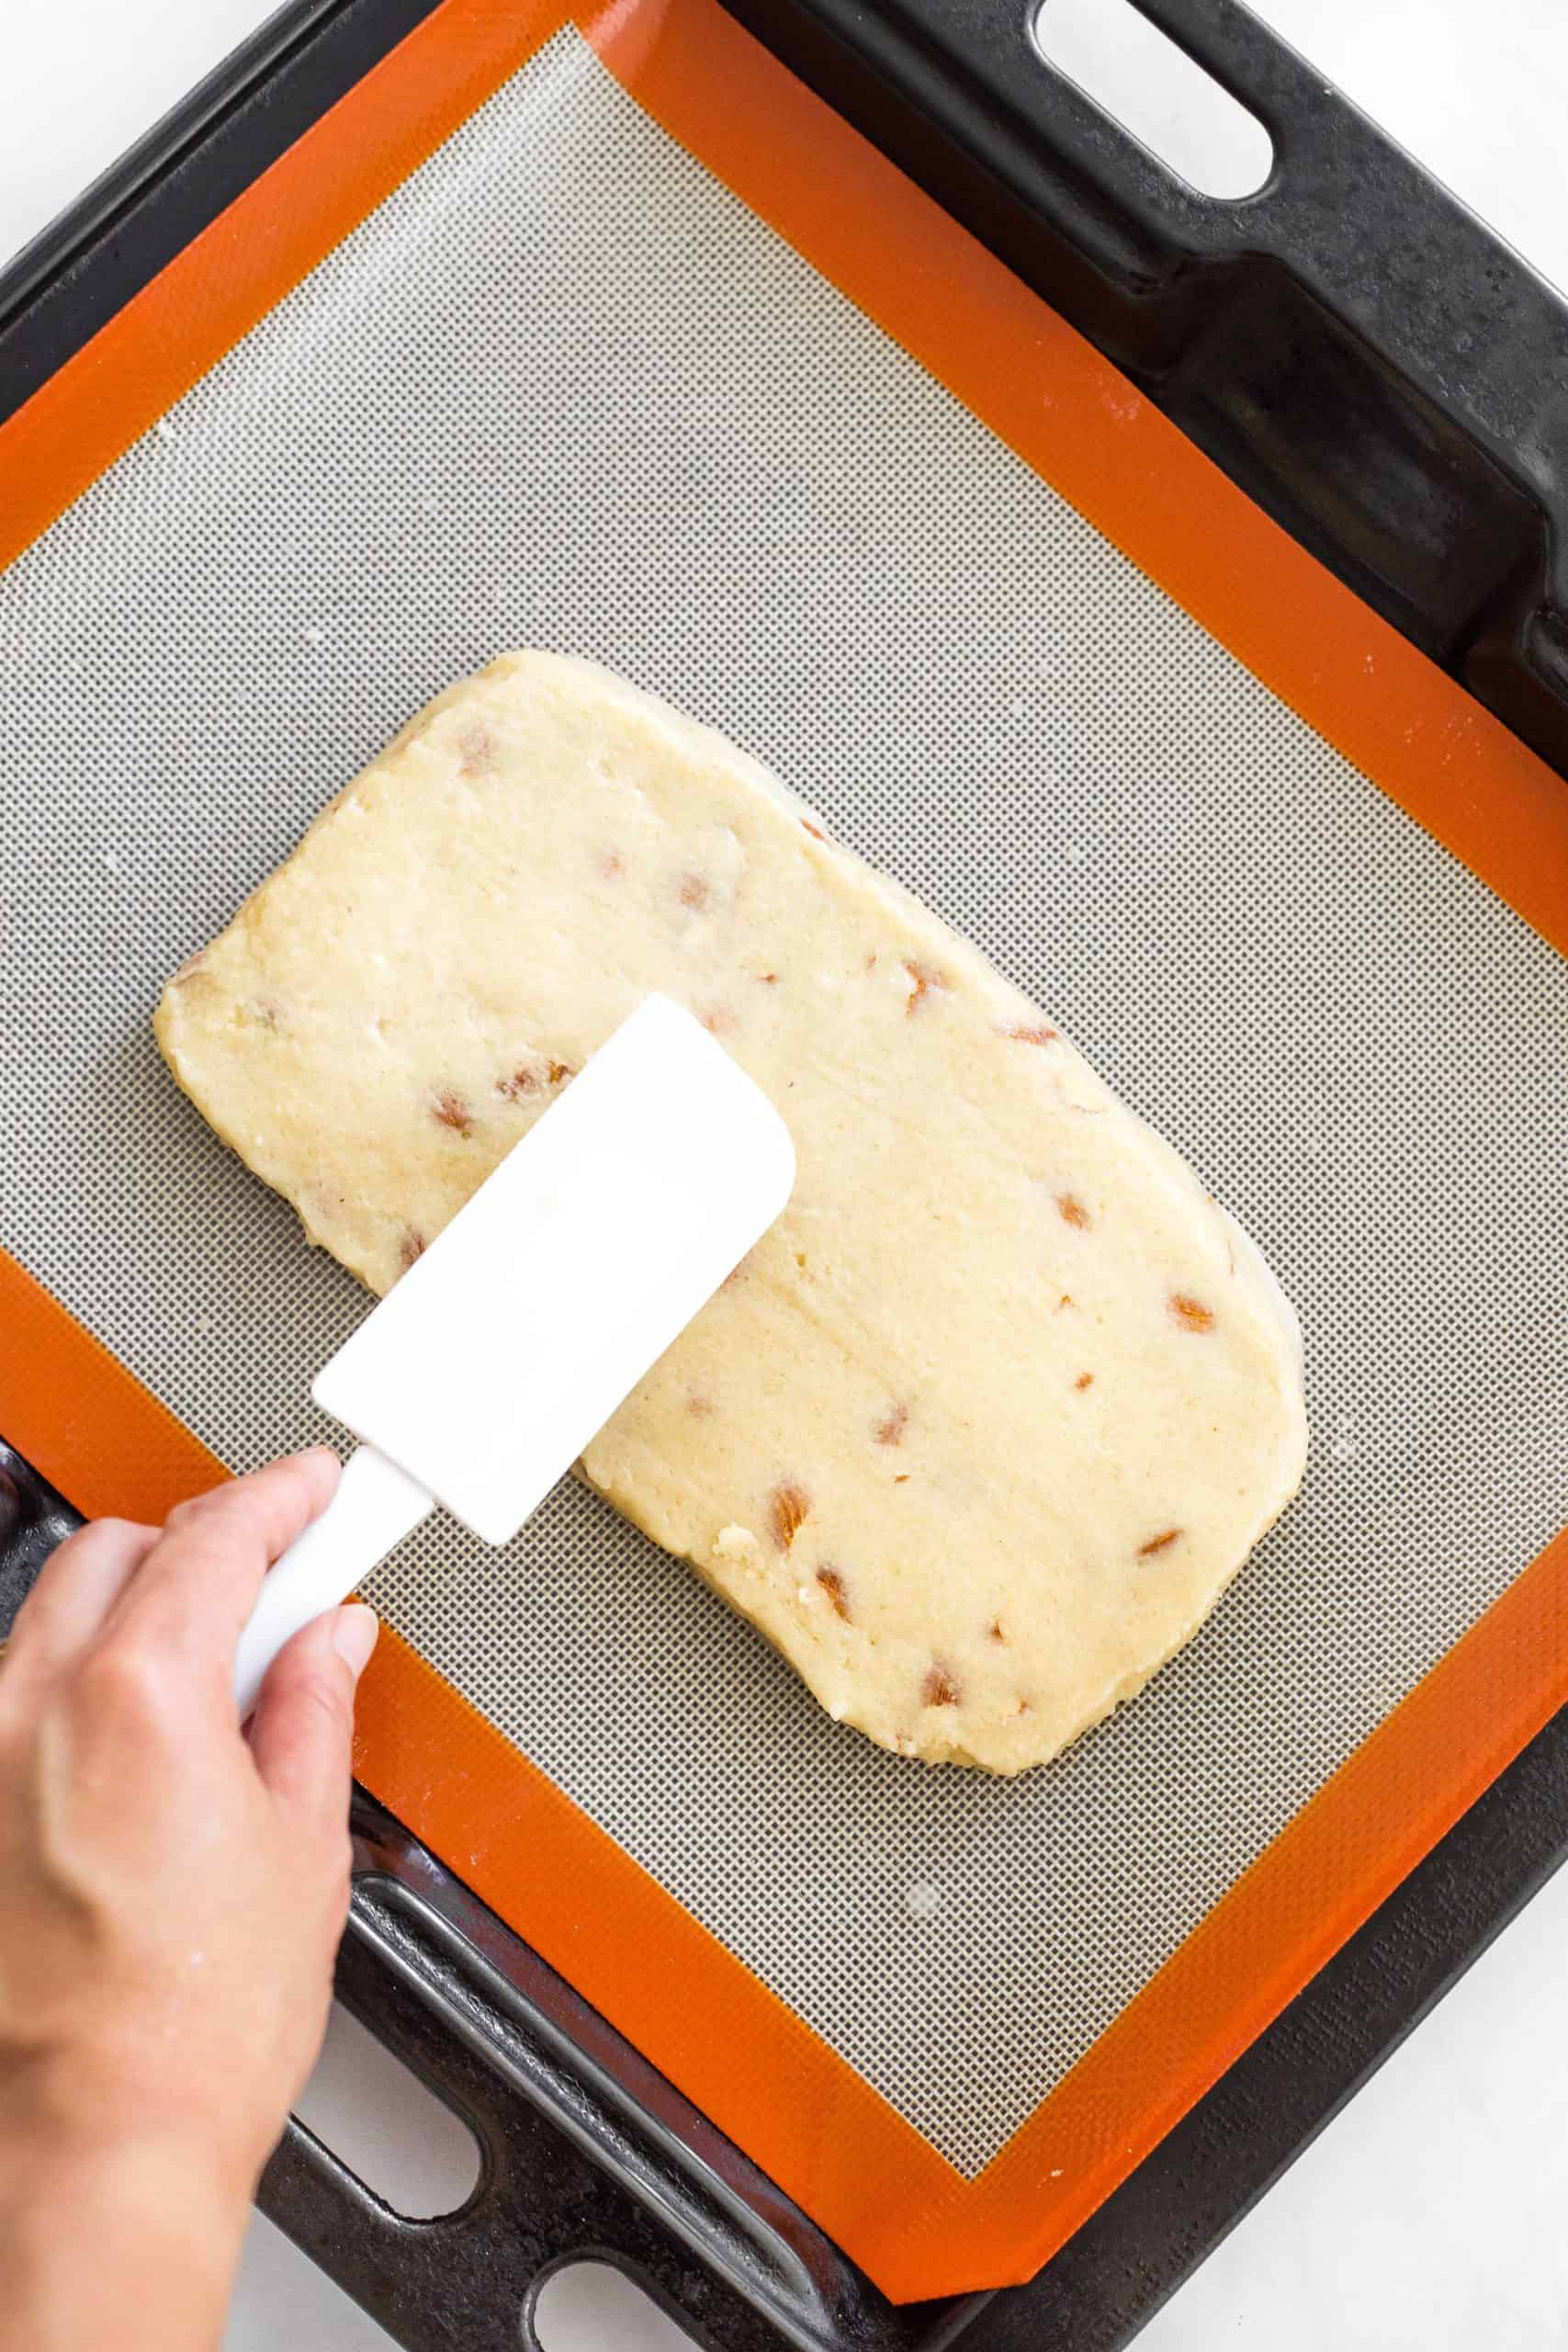 Smoothing the top of a rectangle dough log with a spatula.